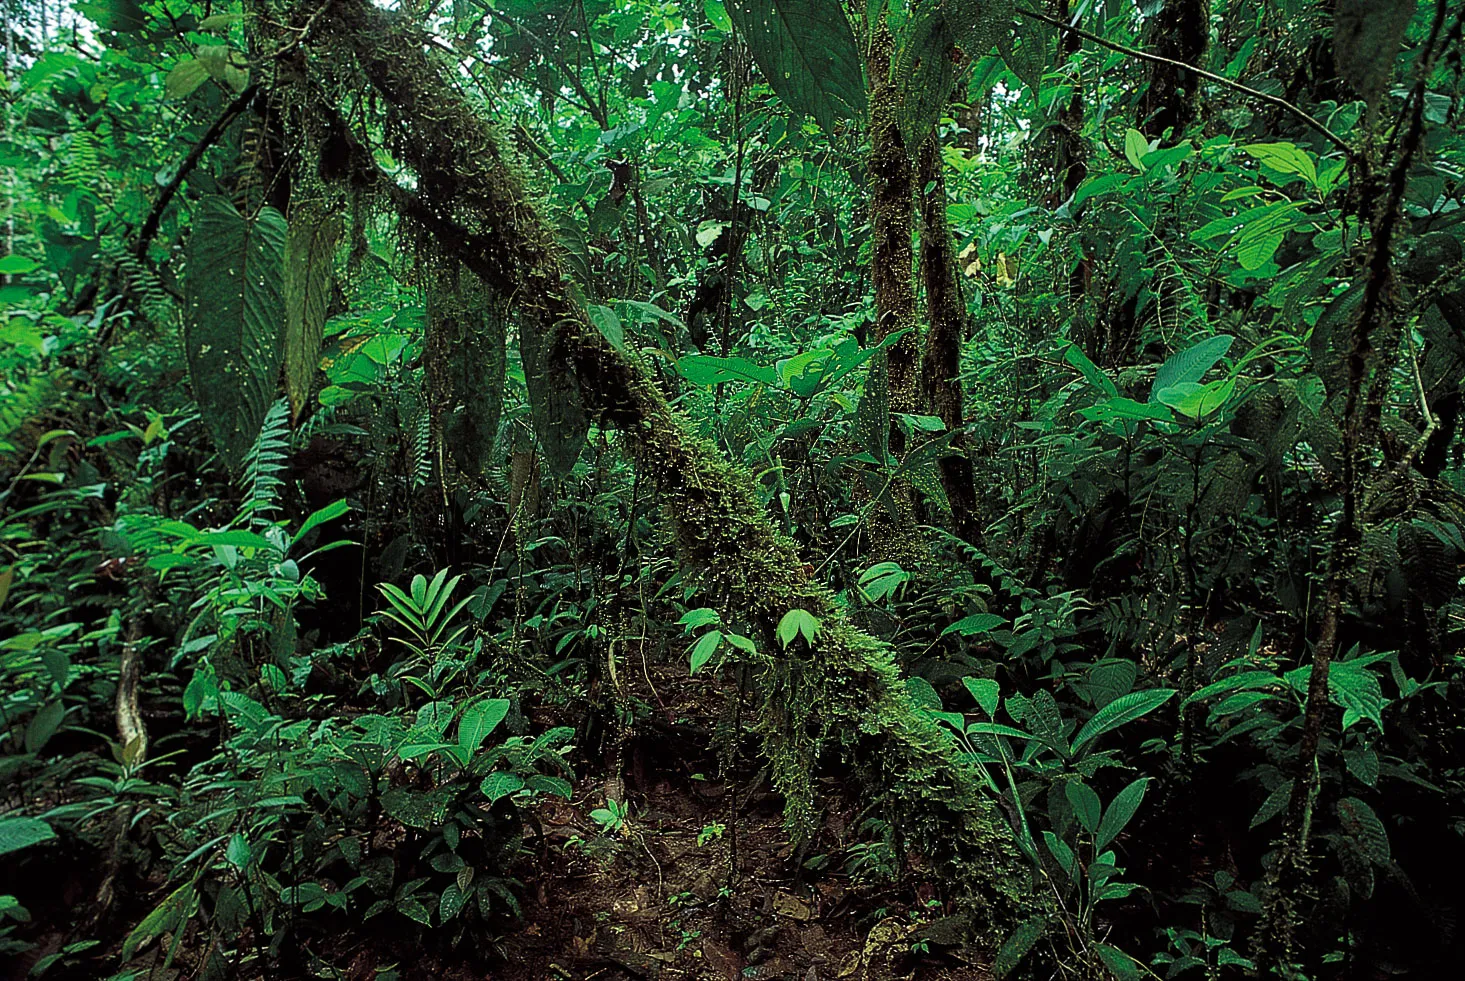 <p><span>hot, humid, and flourishing dense forest with lots of rainfall</span></p>